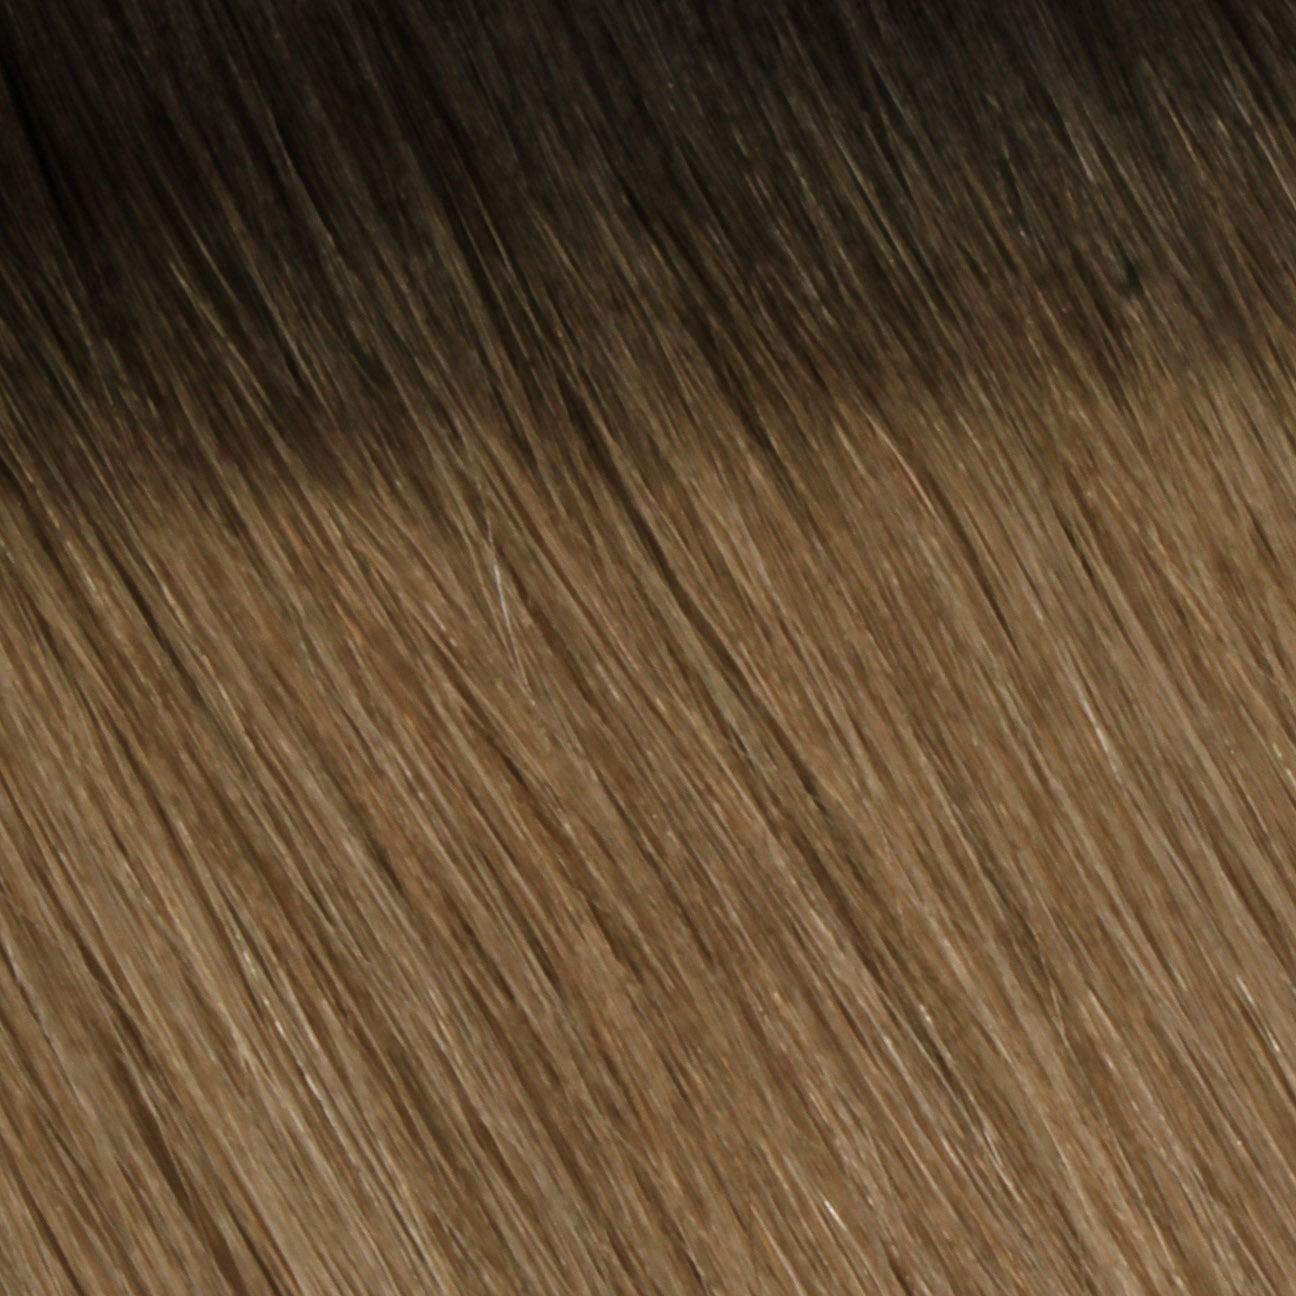 Nano Bonds 18 Inches - SWAY Hair Extensions Mochaccino-Melt-R2-6-24 Ultra-fine, invisible bonds for a flawless, natural look. 100% Remy Human hair, lightweight and versatile. Reusable and perfect for individual or salon use.